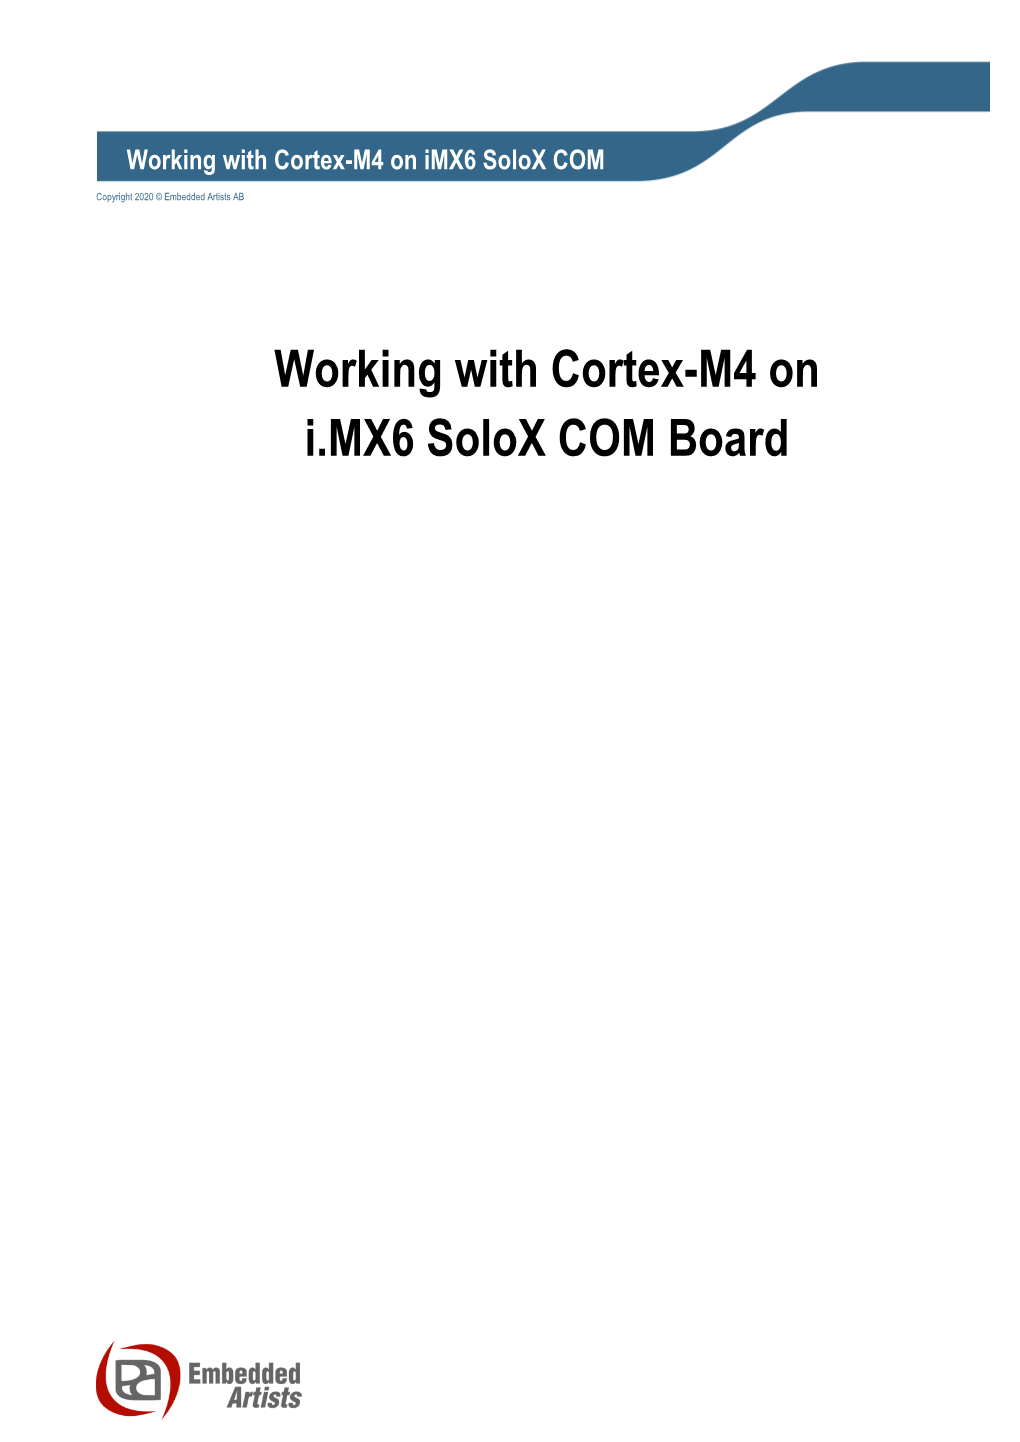 Imx6 Solox Working with Cortex-M4